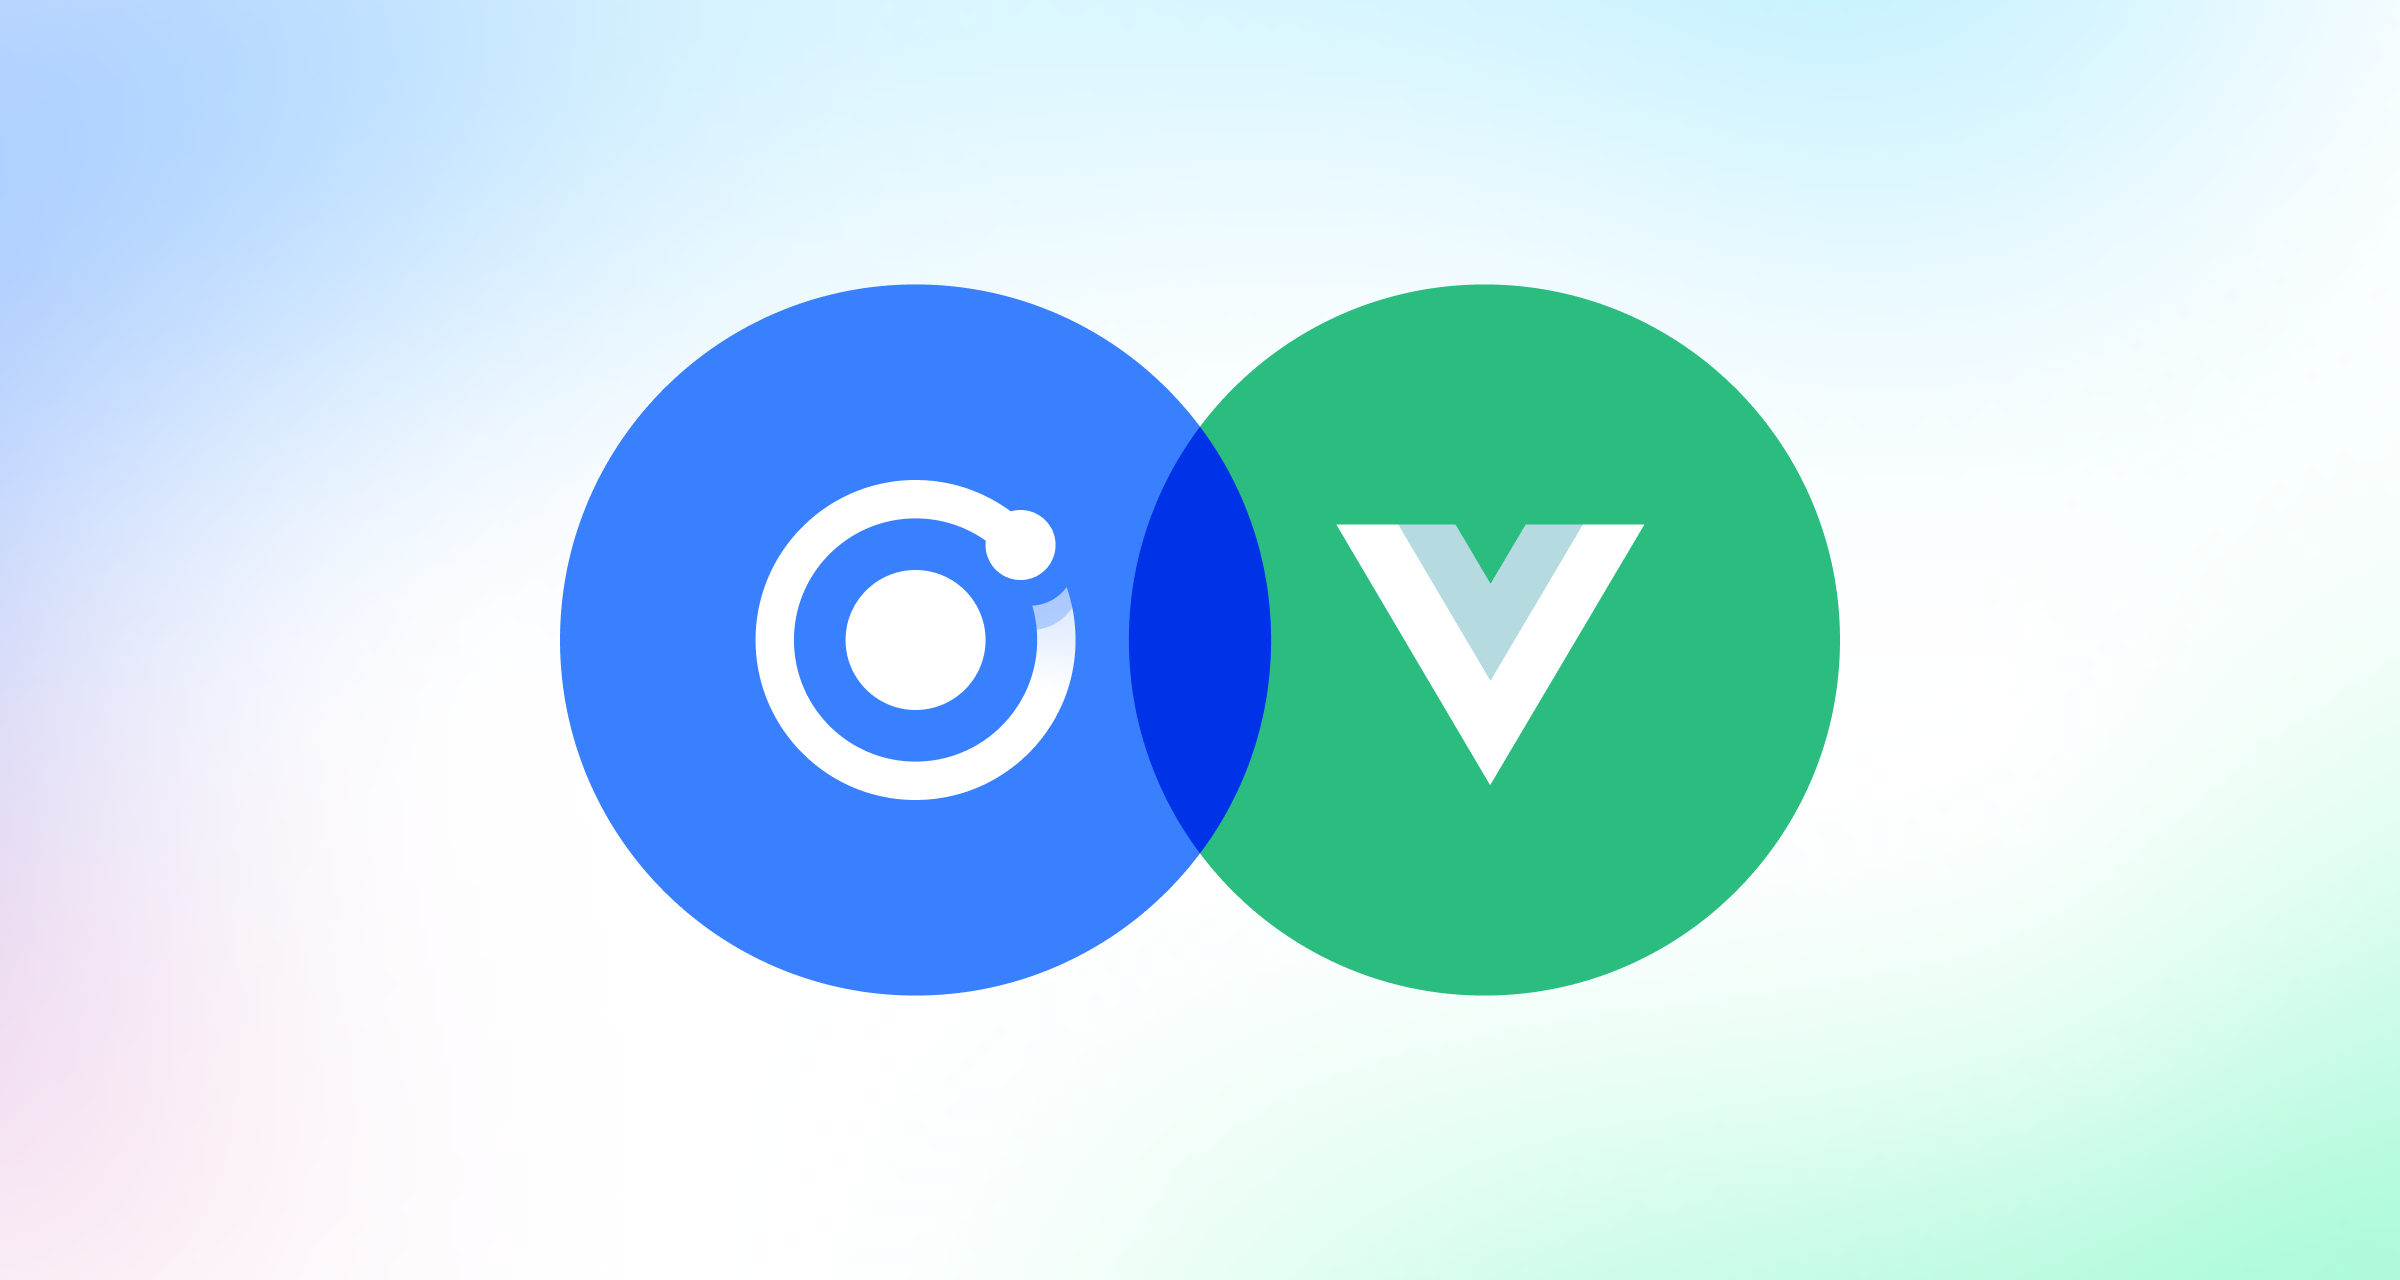 Native and Progressive Web Apps Vue and Ionic